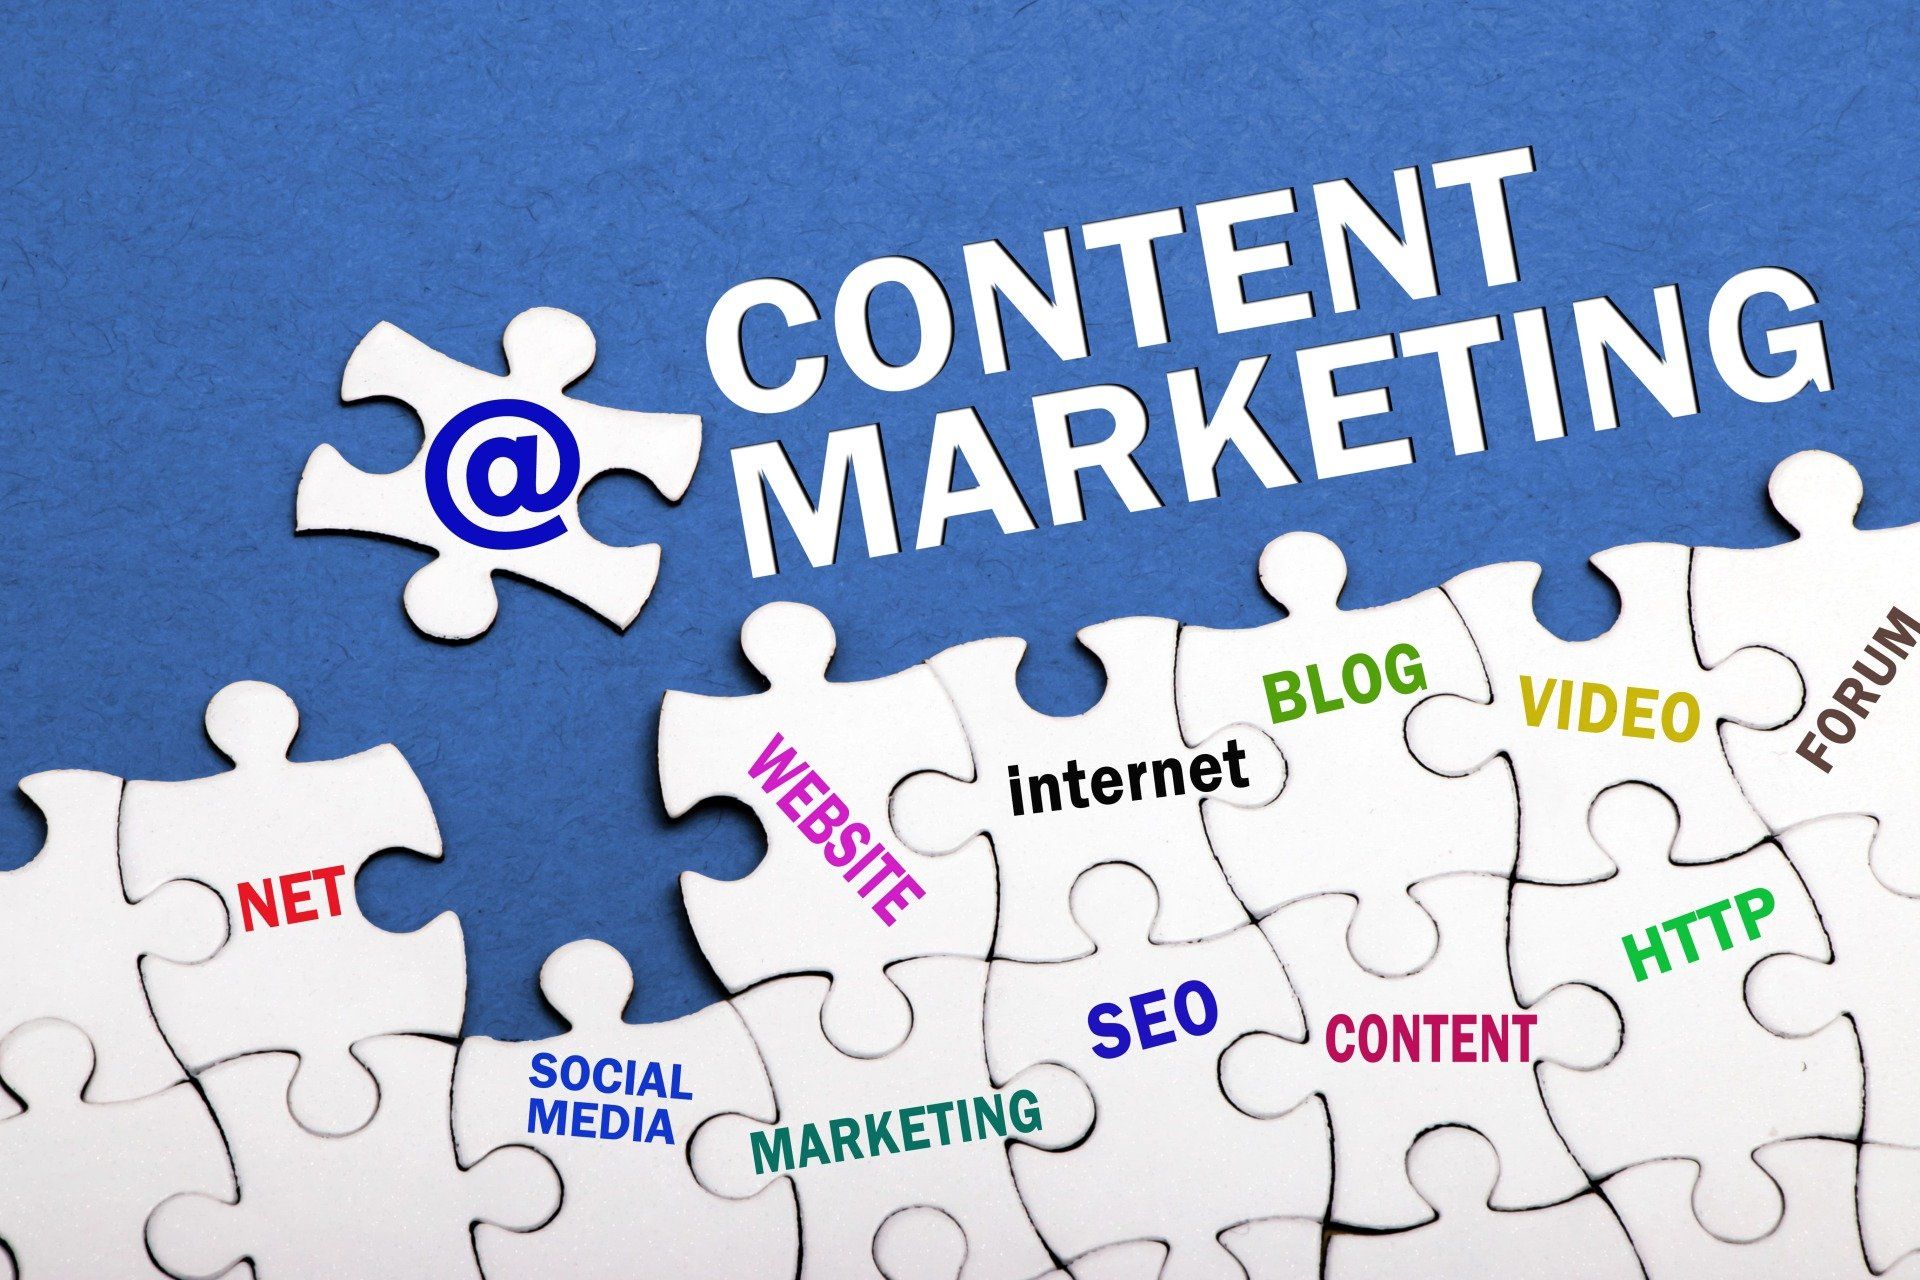 What’s the best content length and how does it affect SEO?